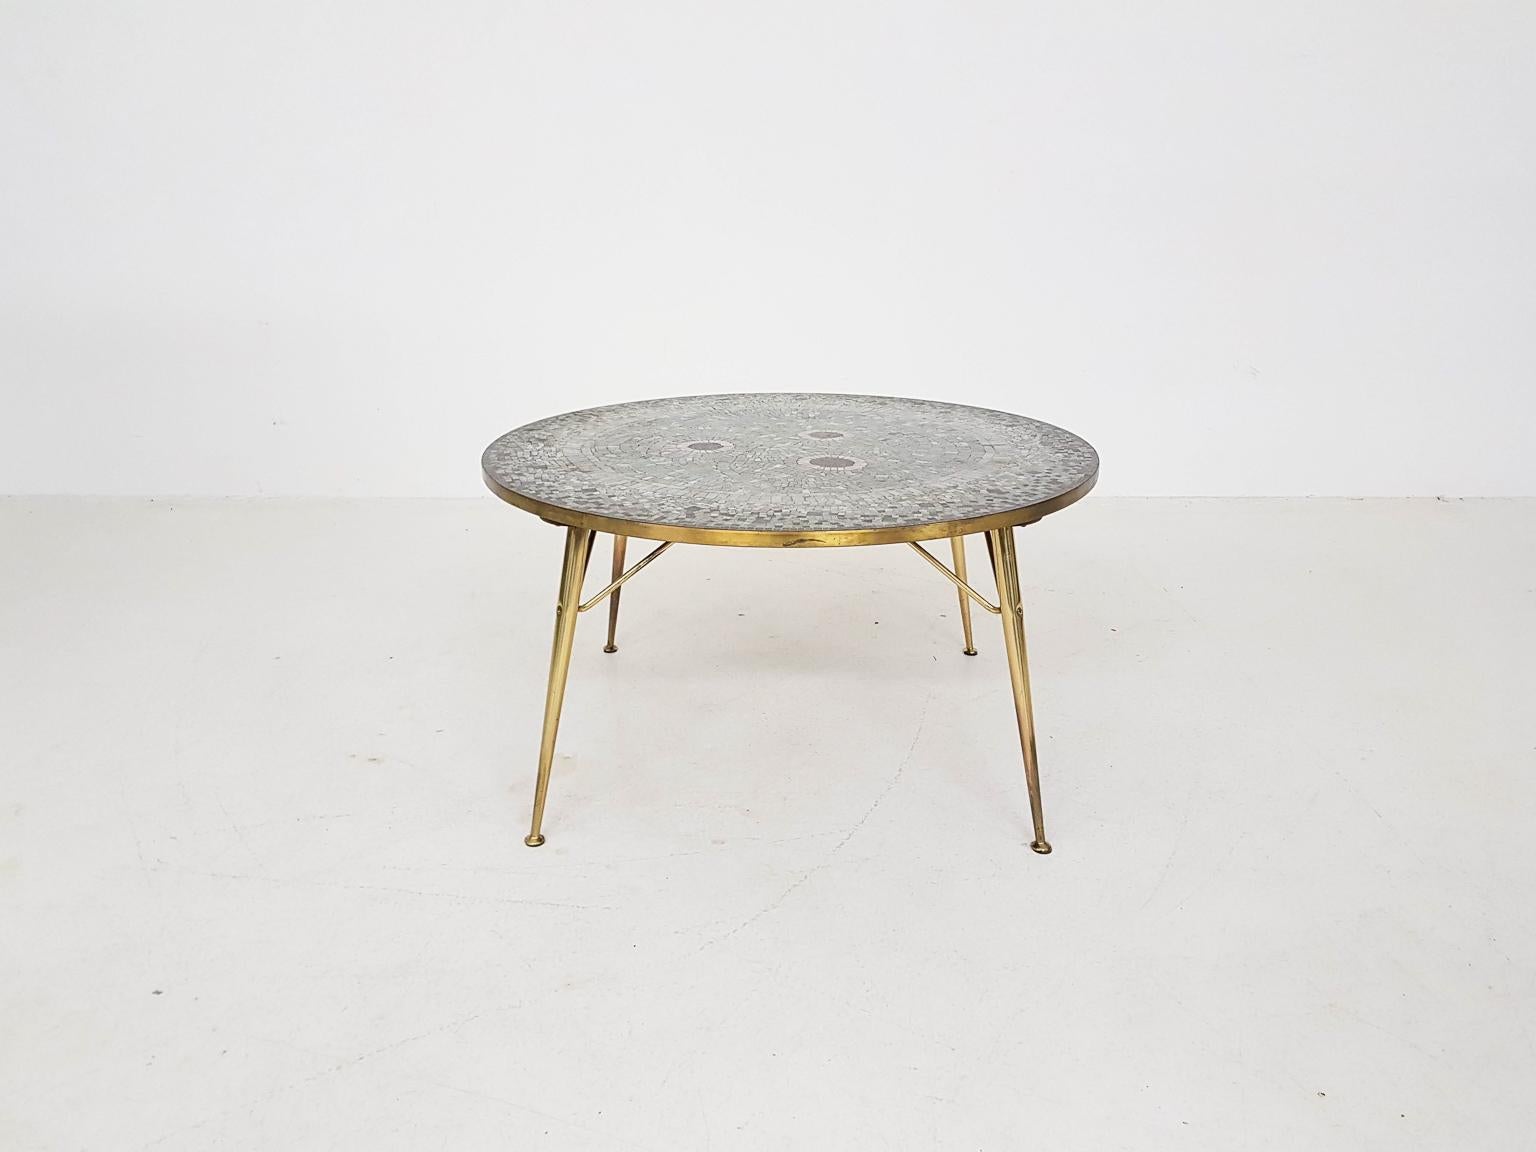 Unique piece of art by German Artist Berthold Müller.

This round mosaic coffee table with its brass legs is the work of the German sculptor Berthold Müller. We think it is one of the most beautiful examples by Müller. With its brass frame it